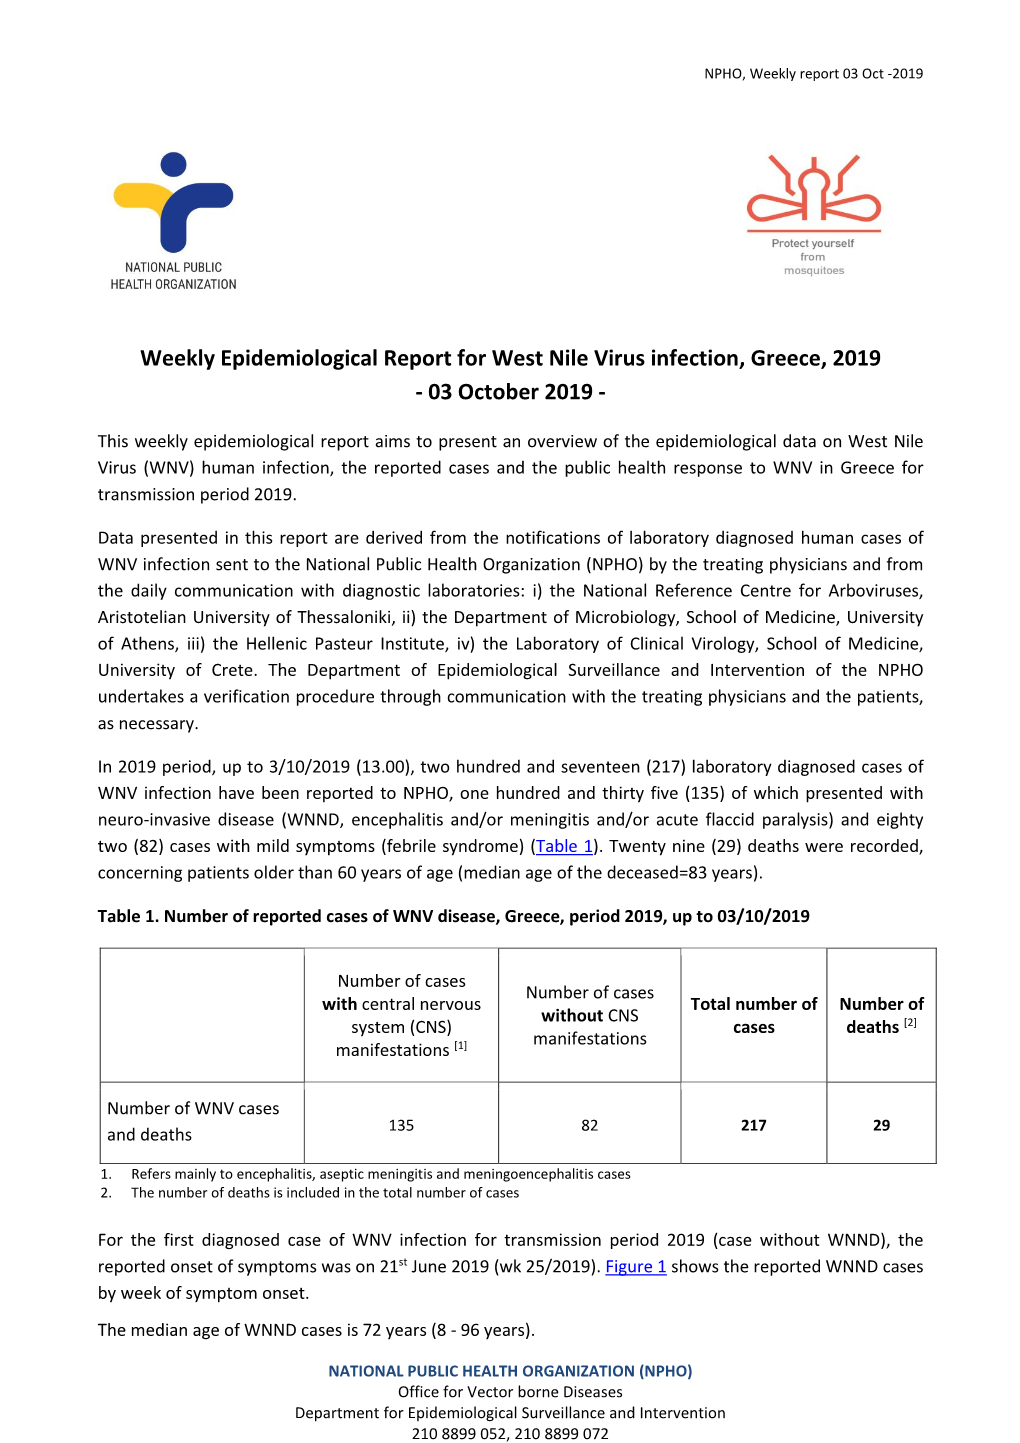 Weekly Epidemiological Report for West Nile Virus Infection, Greece, 2019 - 03 October 2019 - 1